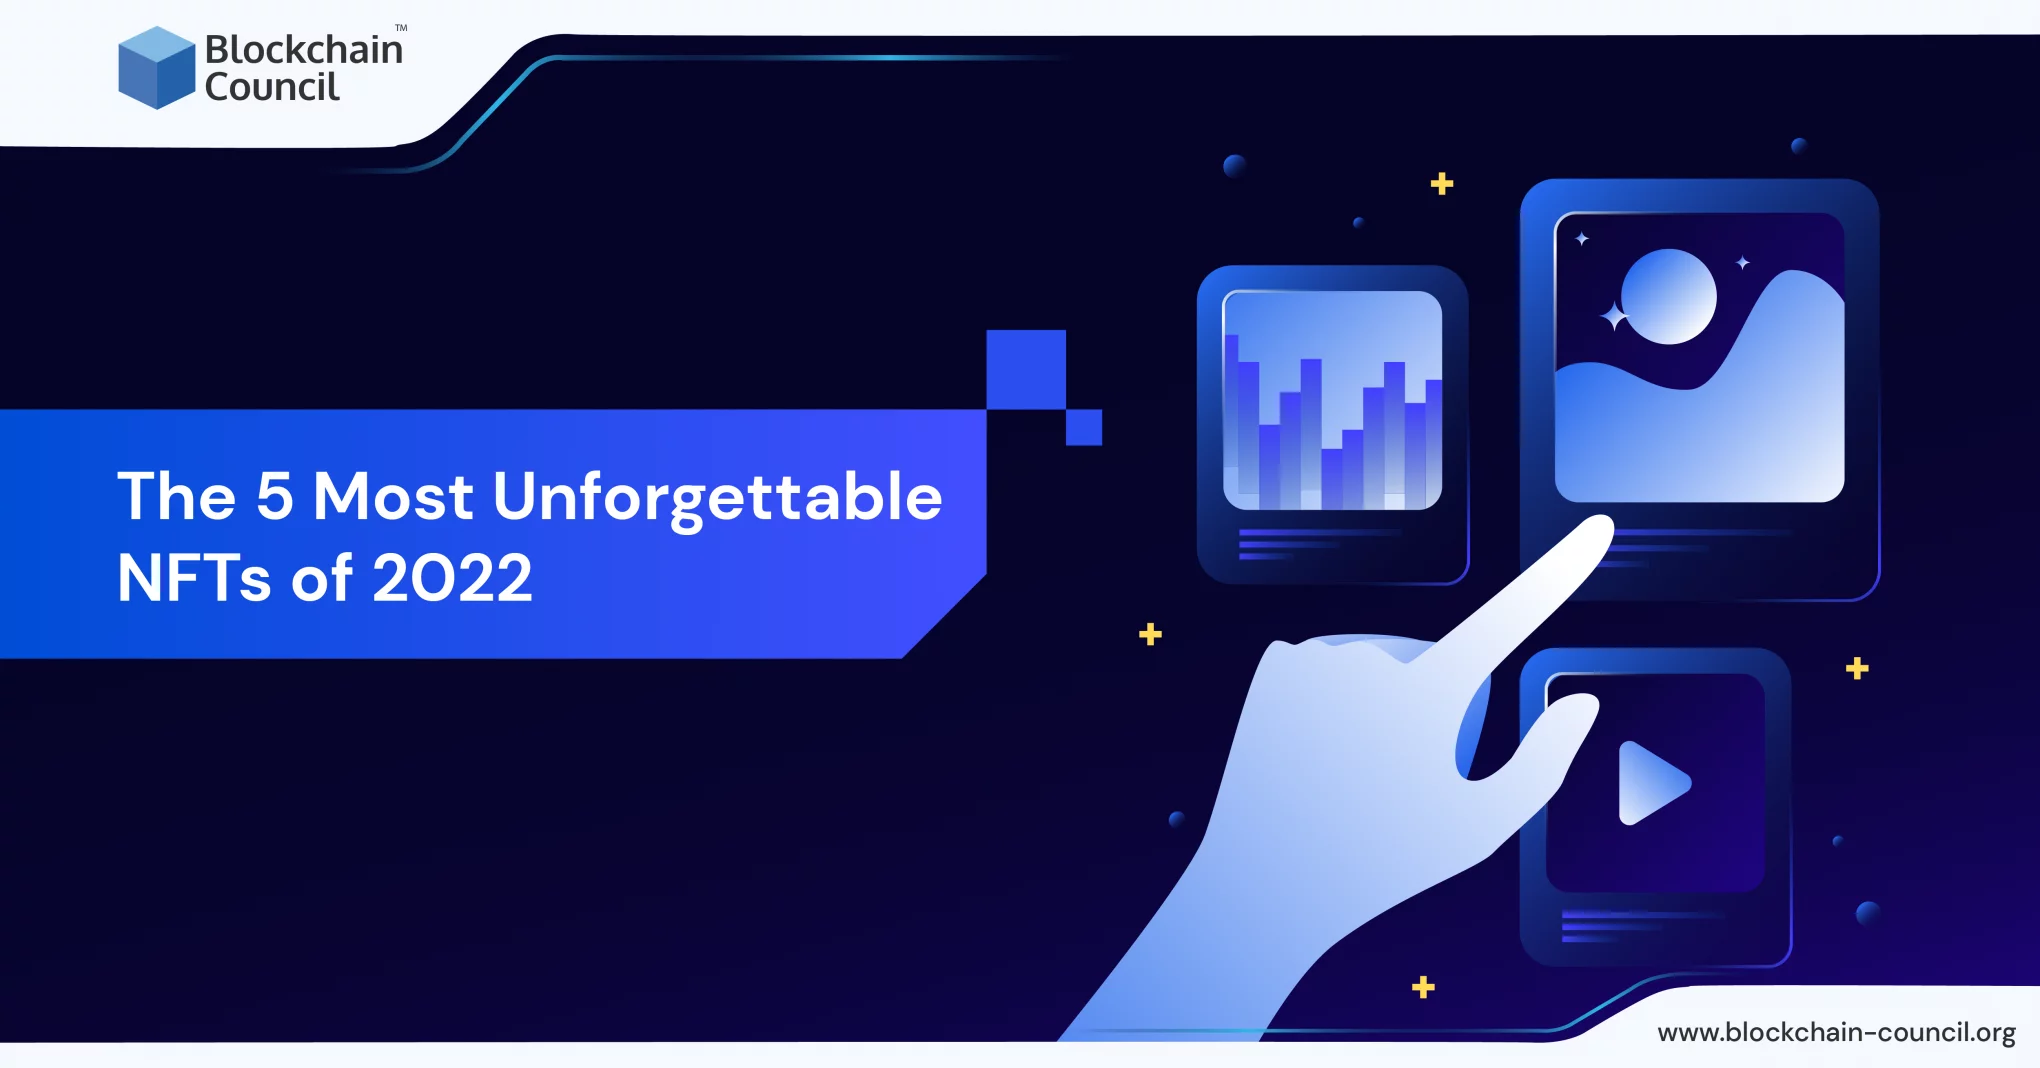 The 5 Most Unforgettable NFTs of 2022